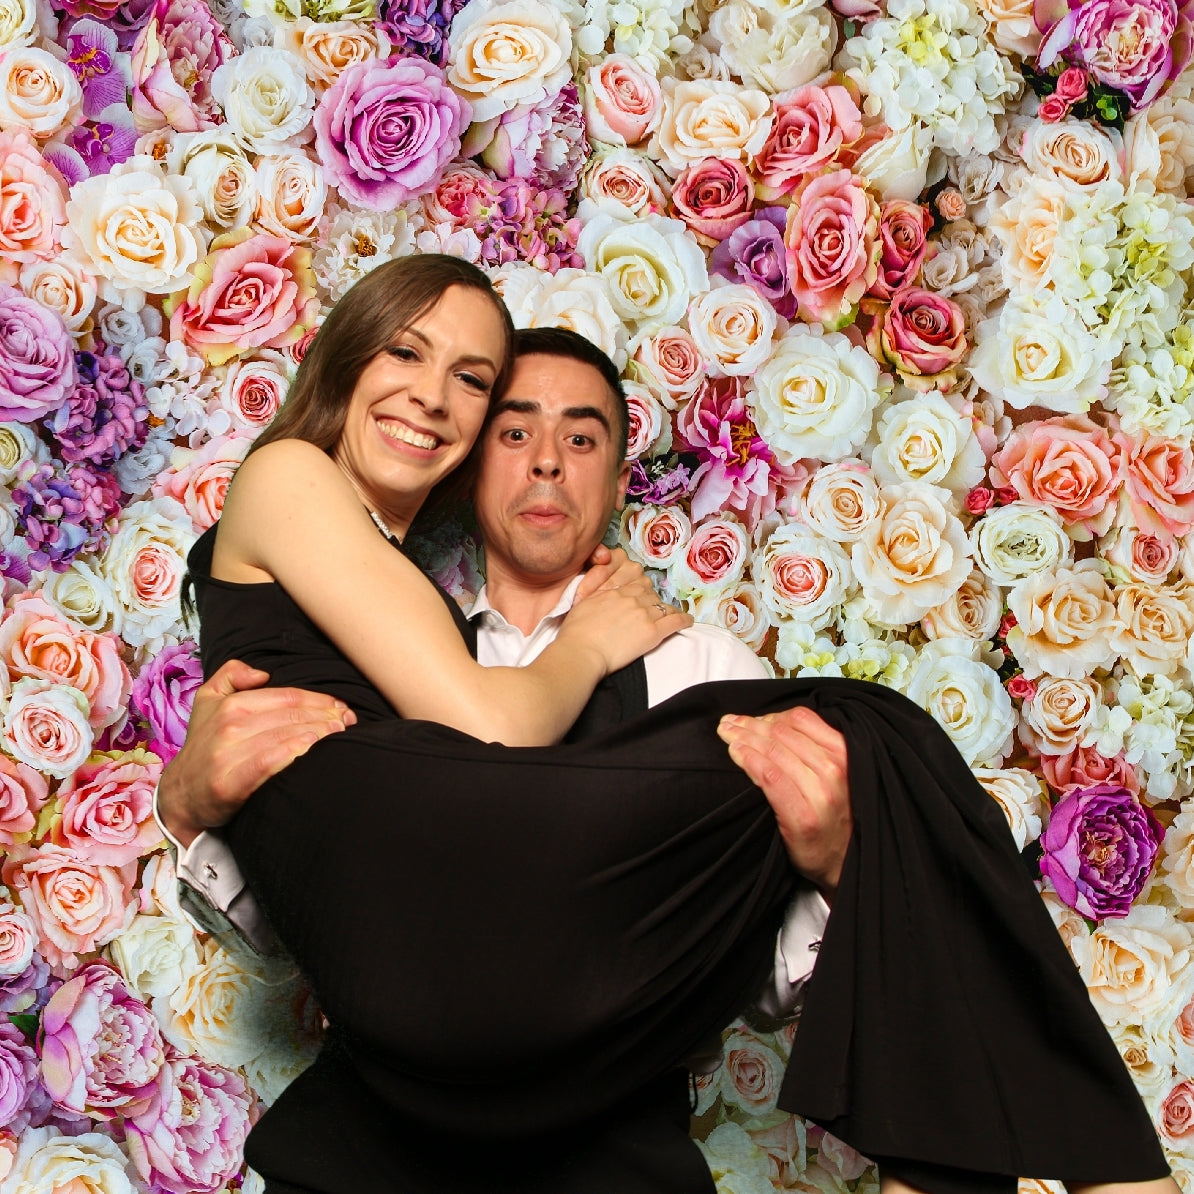 Guy lifting up his girlfriend for a photo booth picture with a flower wall backdrop